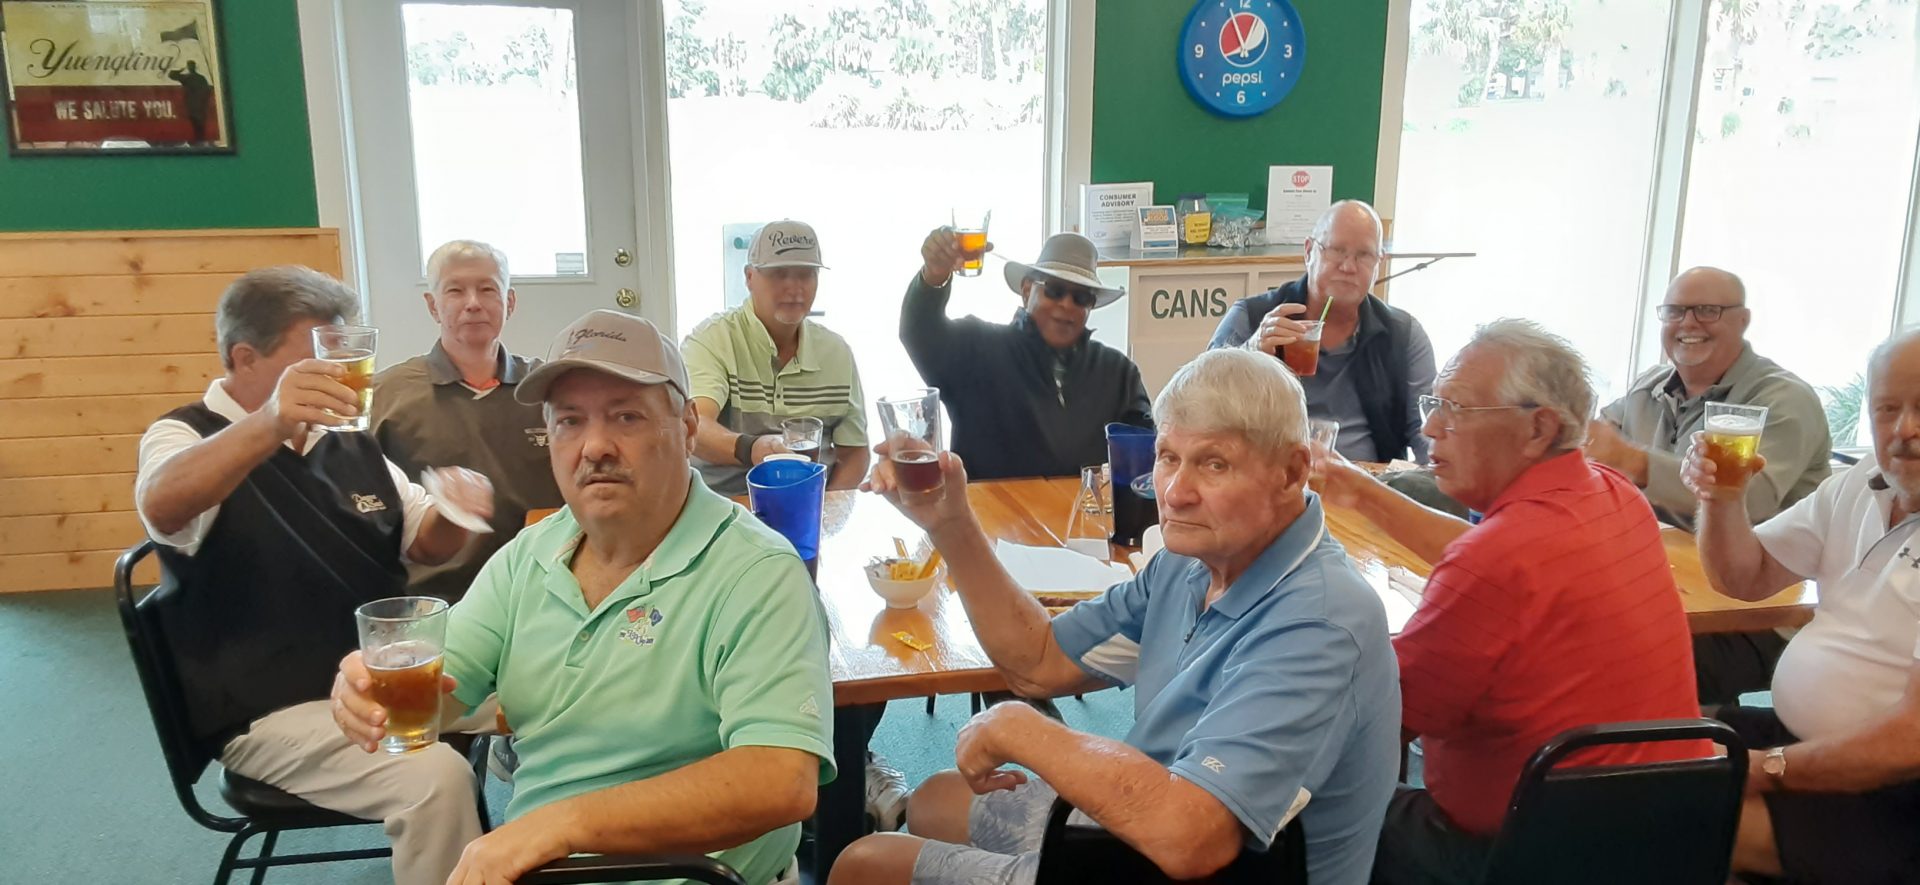 A salute to George from the last to leave Golfers of the Daytona Traveling Golf League